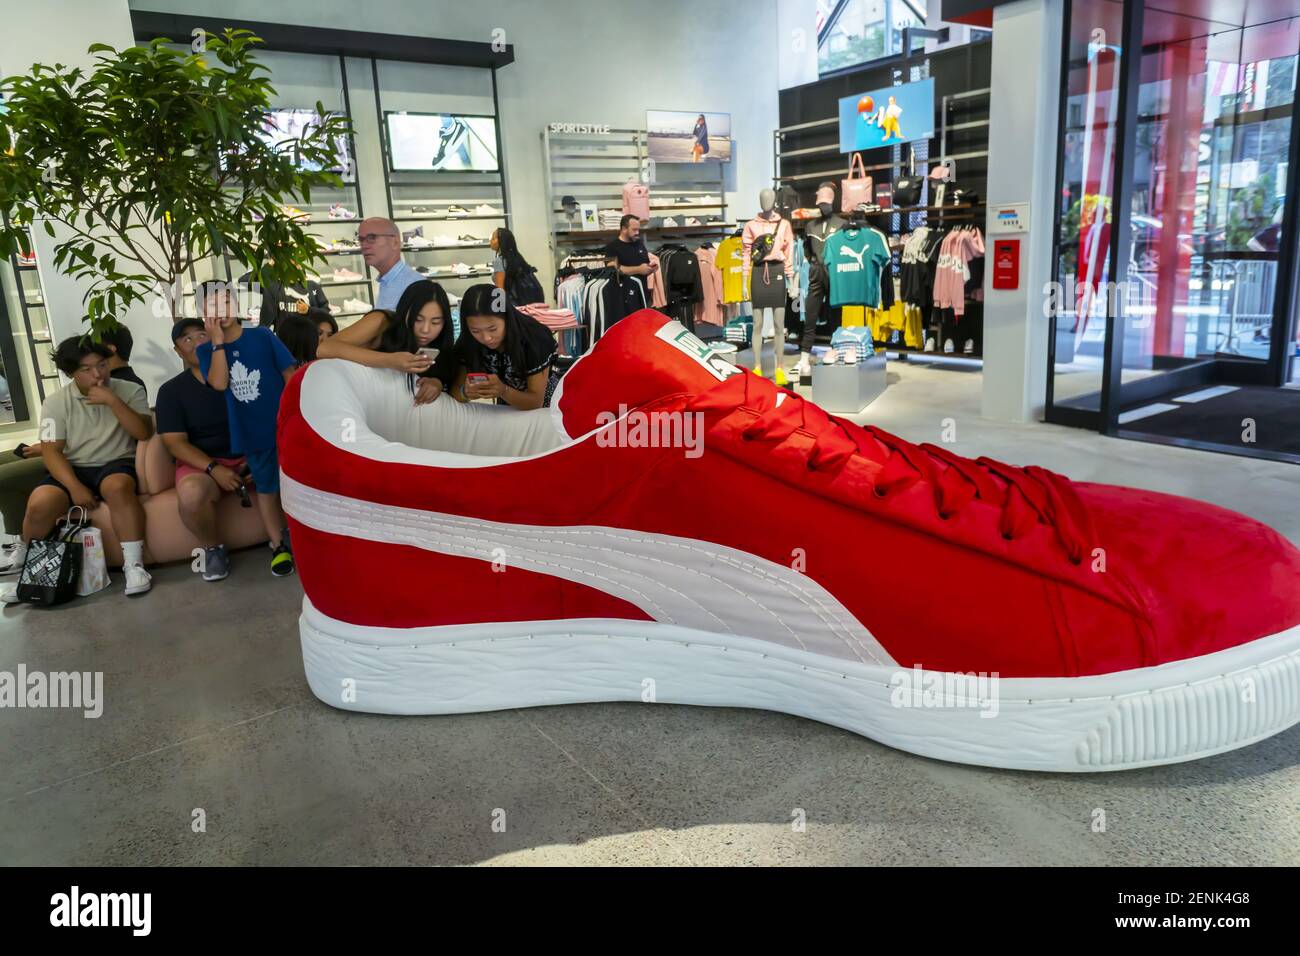 Exterior puma store hi-res stock photography and images - Alamy